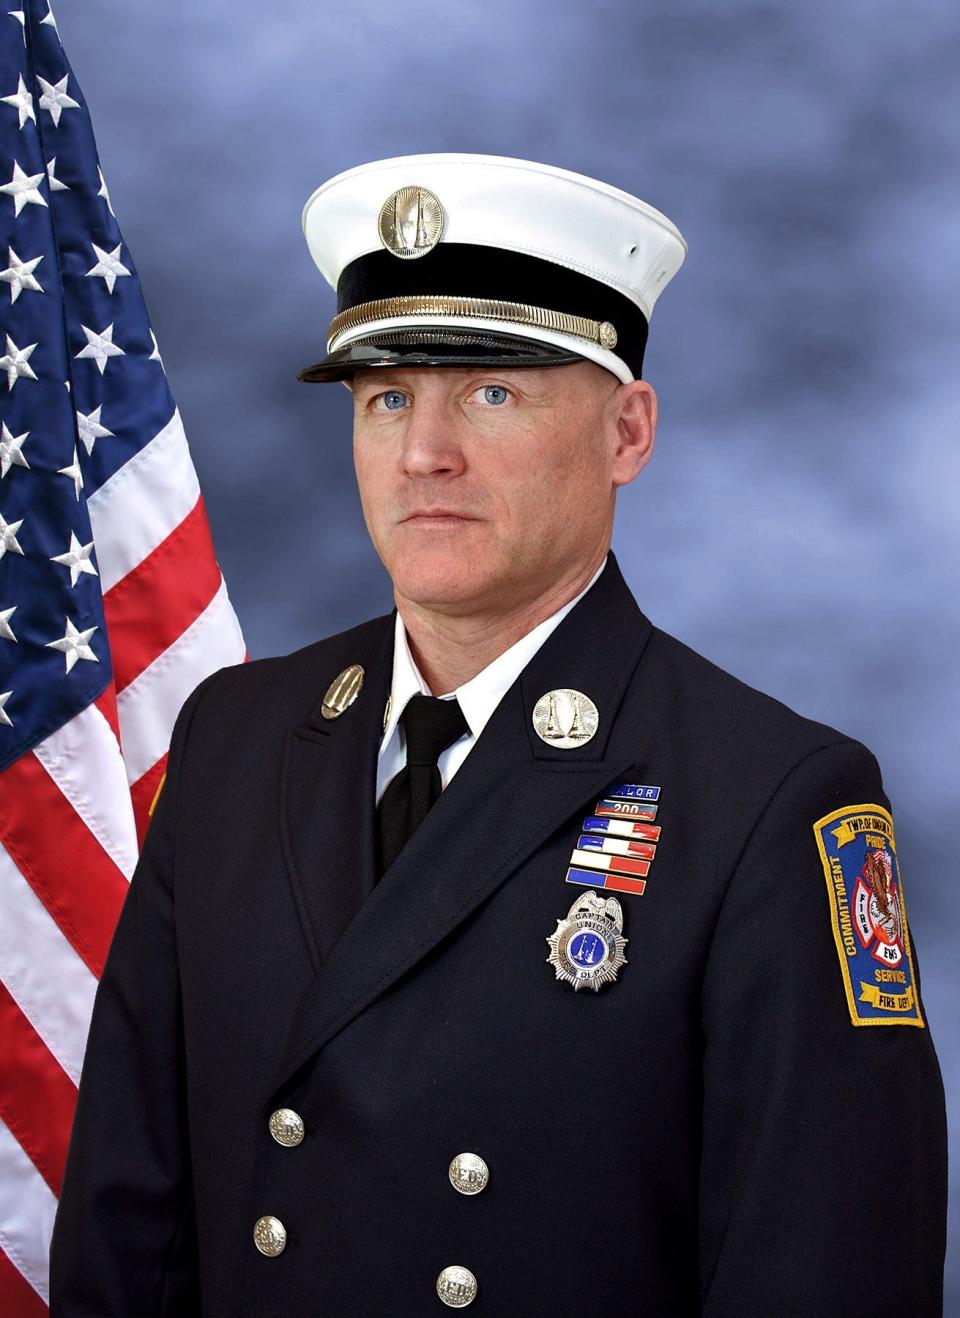 Union Township Fire Capt. Kenneth DeHart is one of 14 recipients of medals of valor this year from the 200 Club of Union County